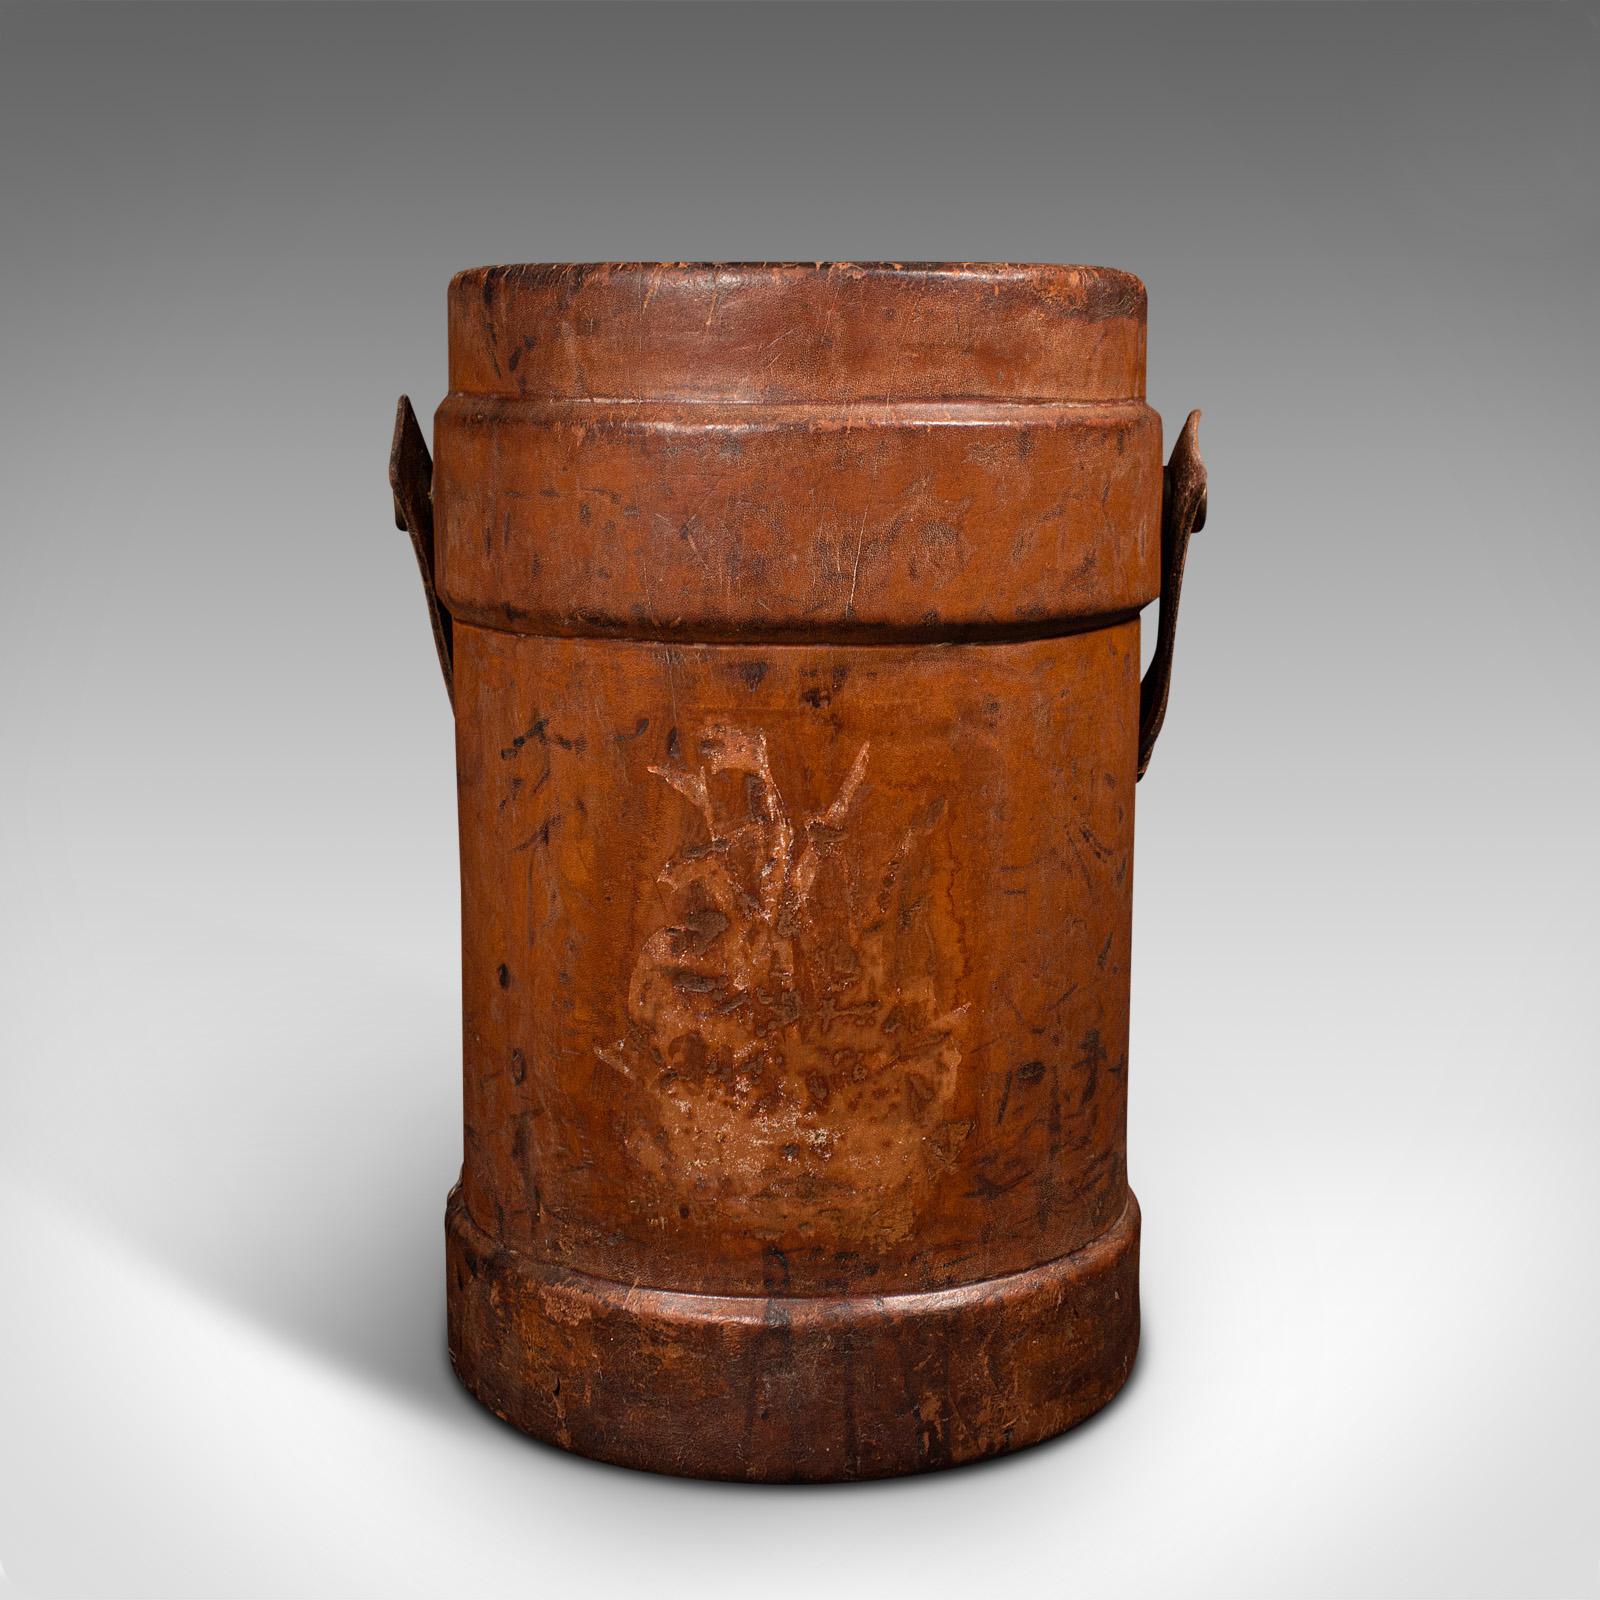 This is an antique decorative bucket. An English, leather garden basket, stick stand or storage bin, dating to the Victorian period, circa 1900.

Wonderfully patinated and rich in colour
Displays a desirable aged patina throughout
Leather tanned